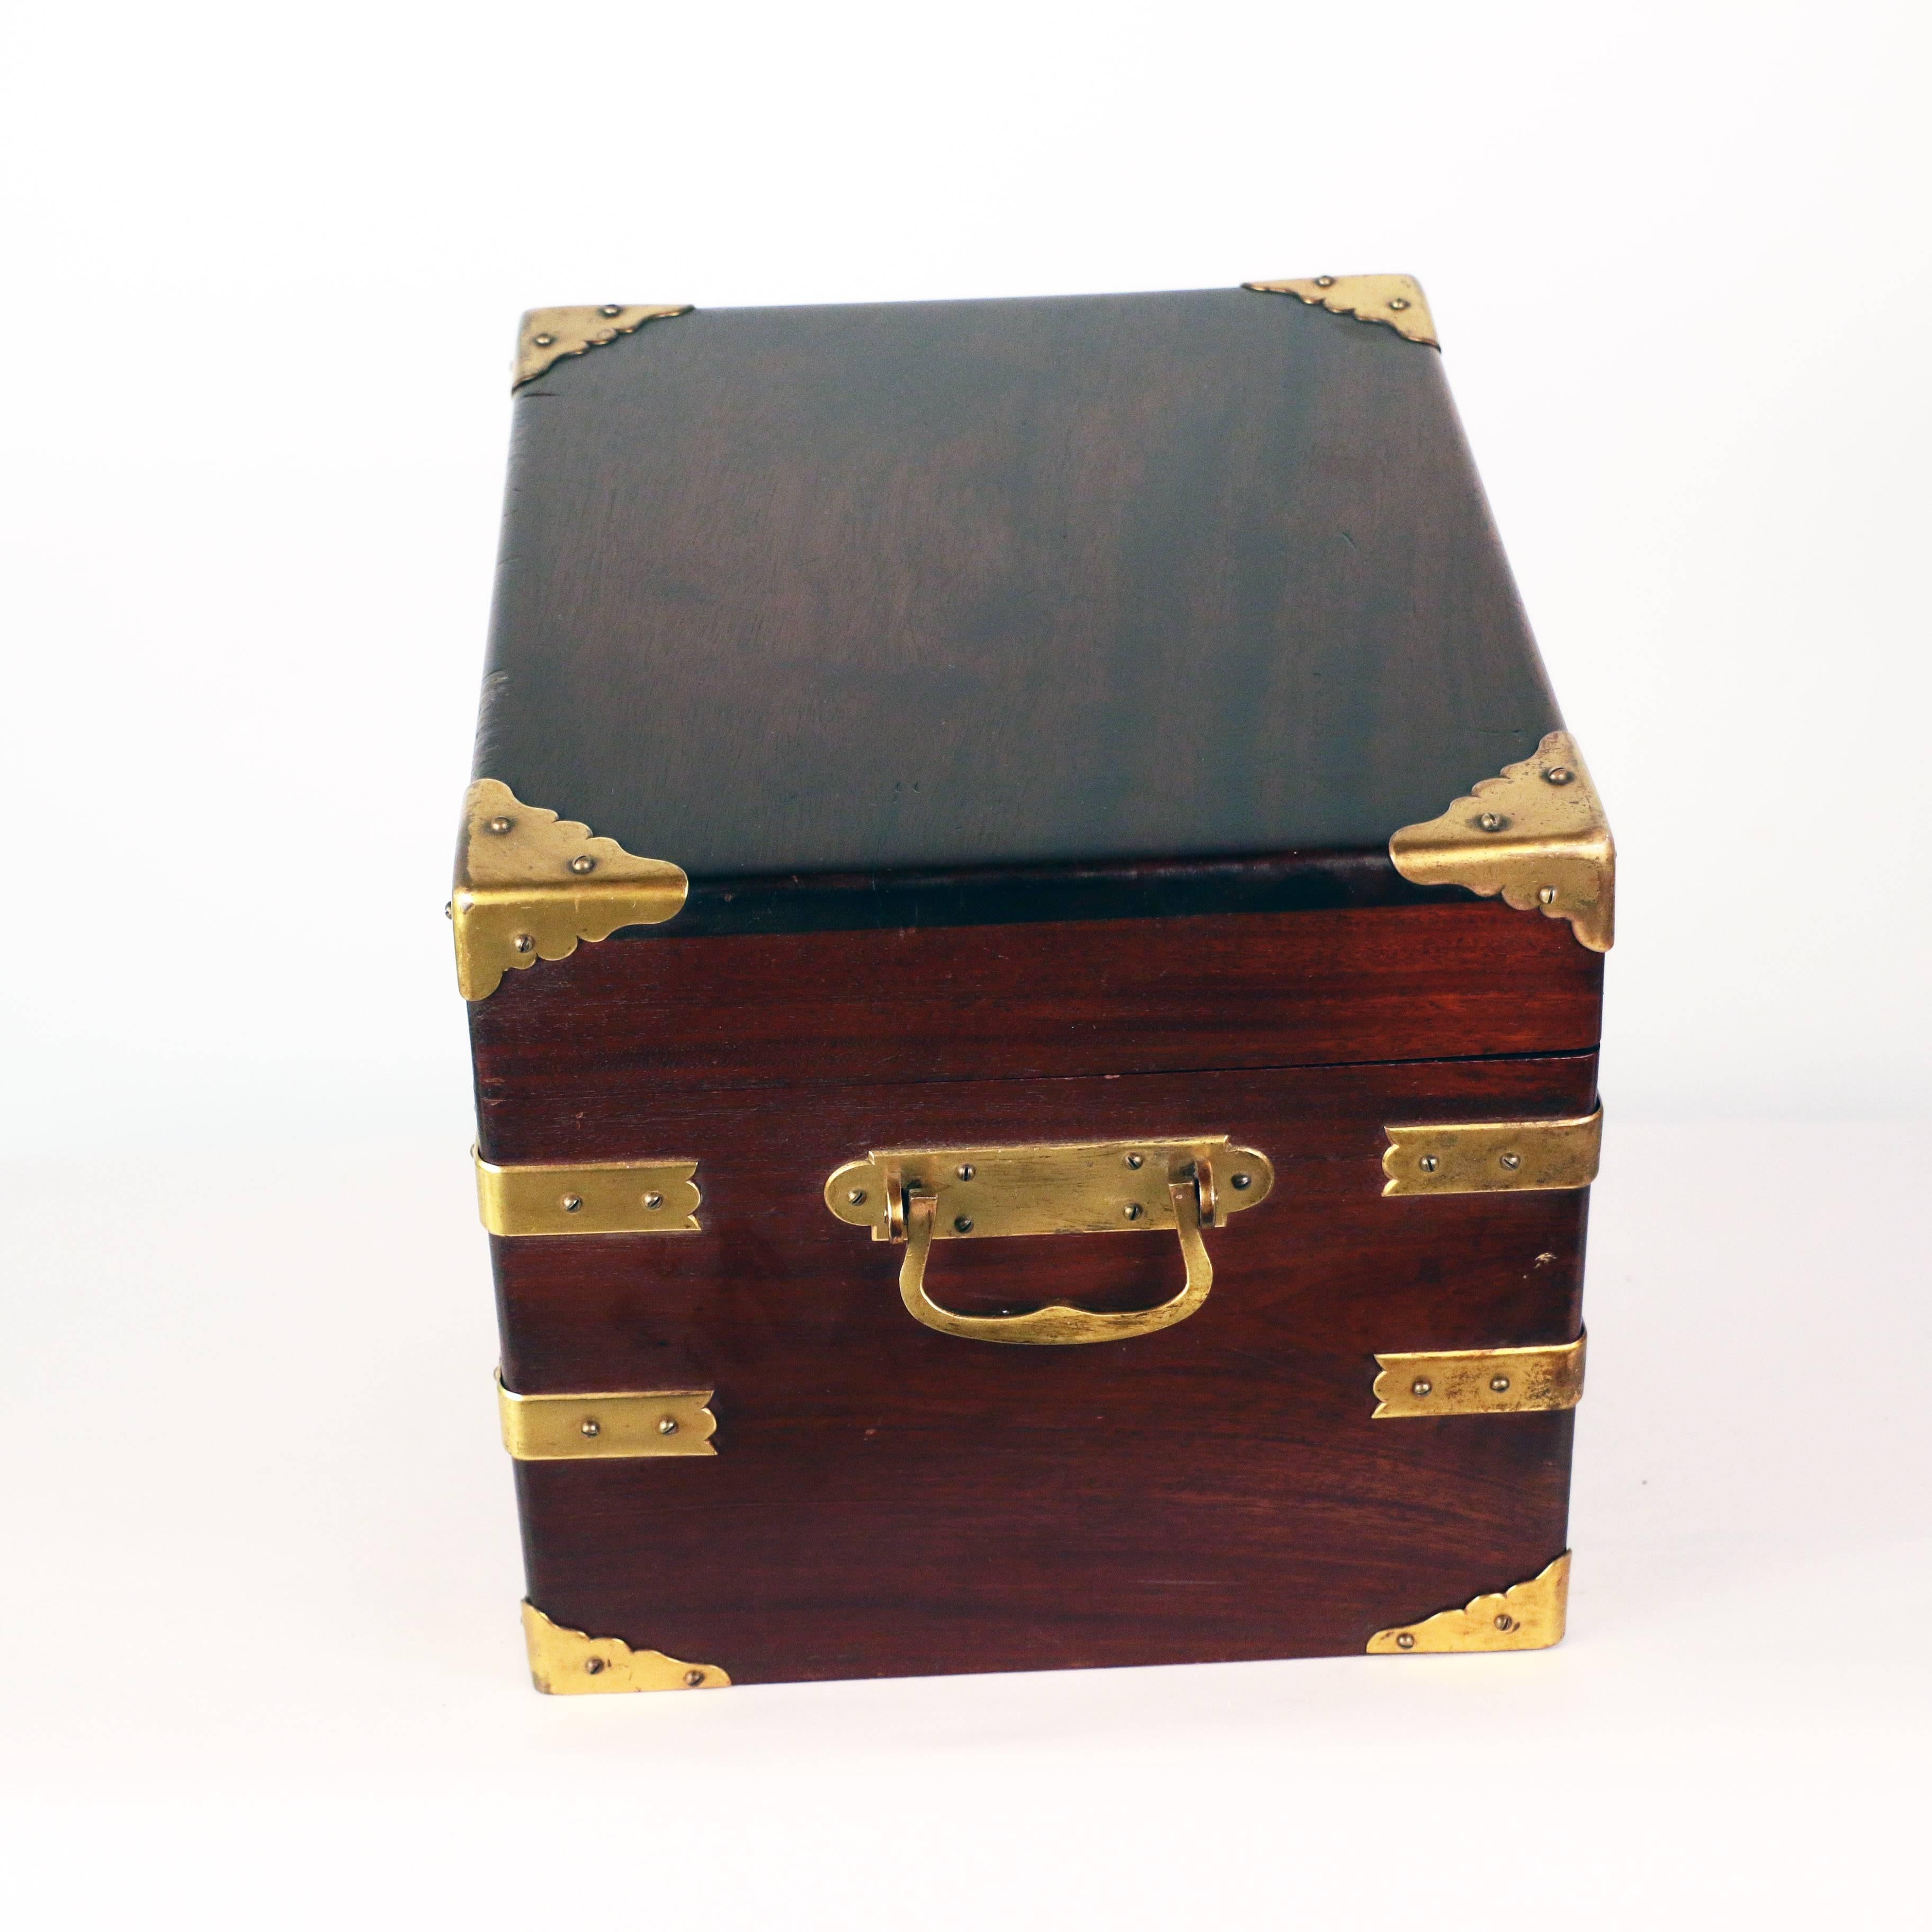 British Edwardian Mahogany and Gilt Brass Bound Humidor by Benson and Hedges